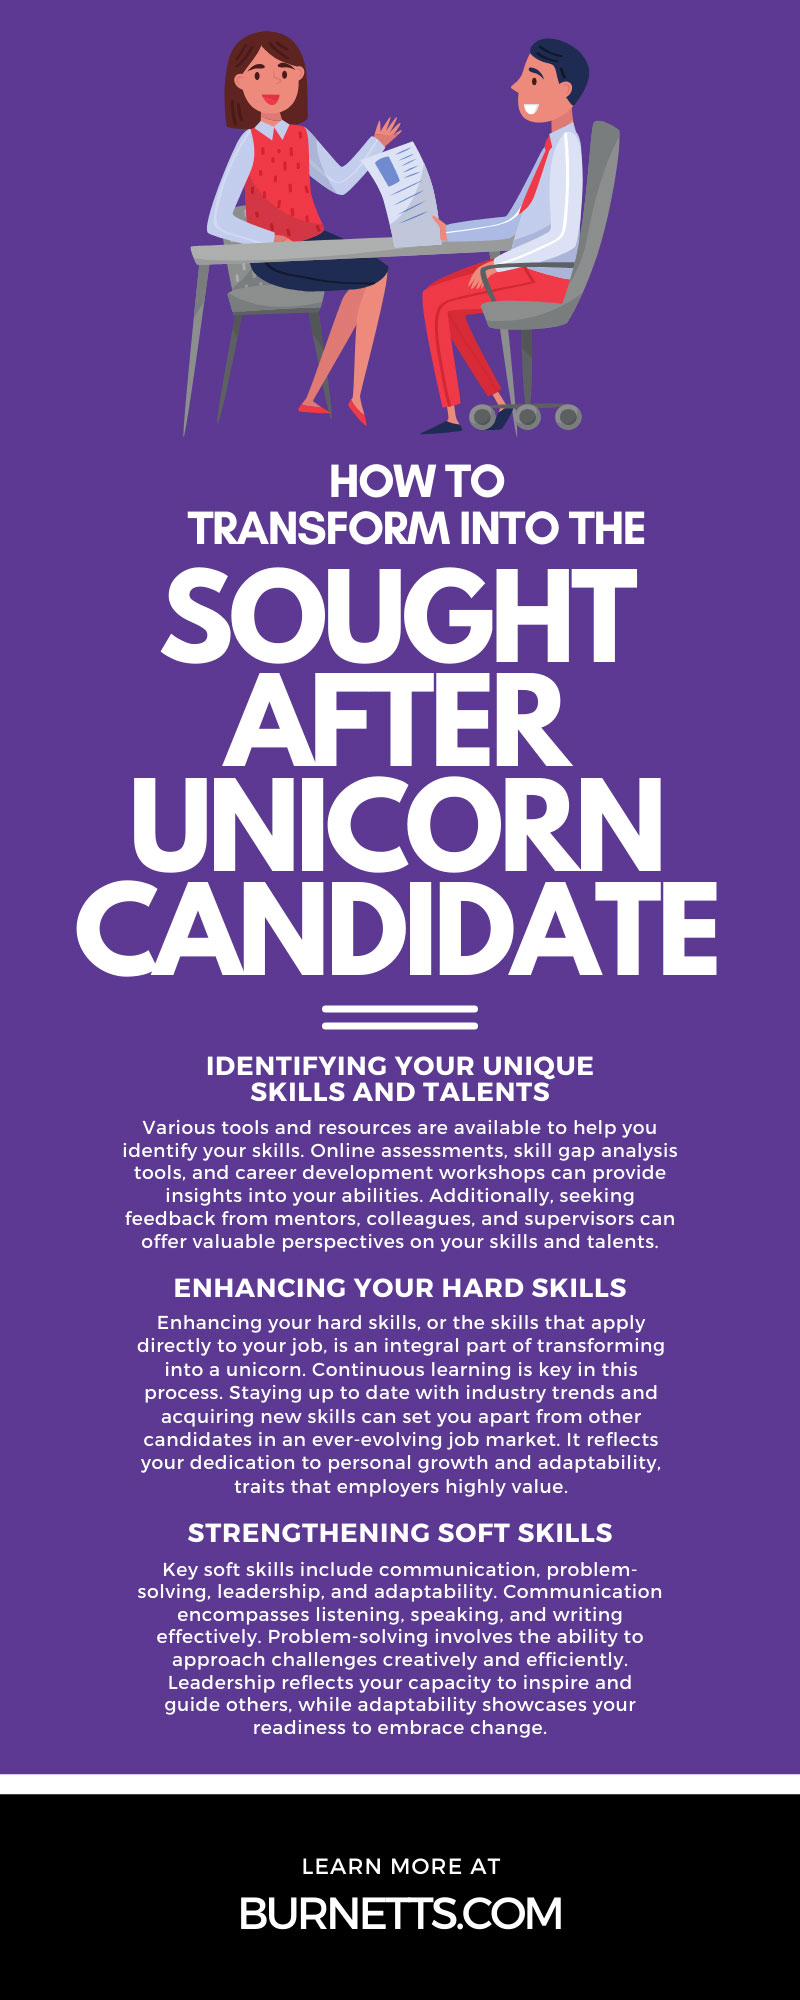 How To Transform Into the Sought After Unicorn Candidate